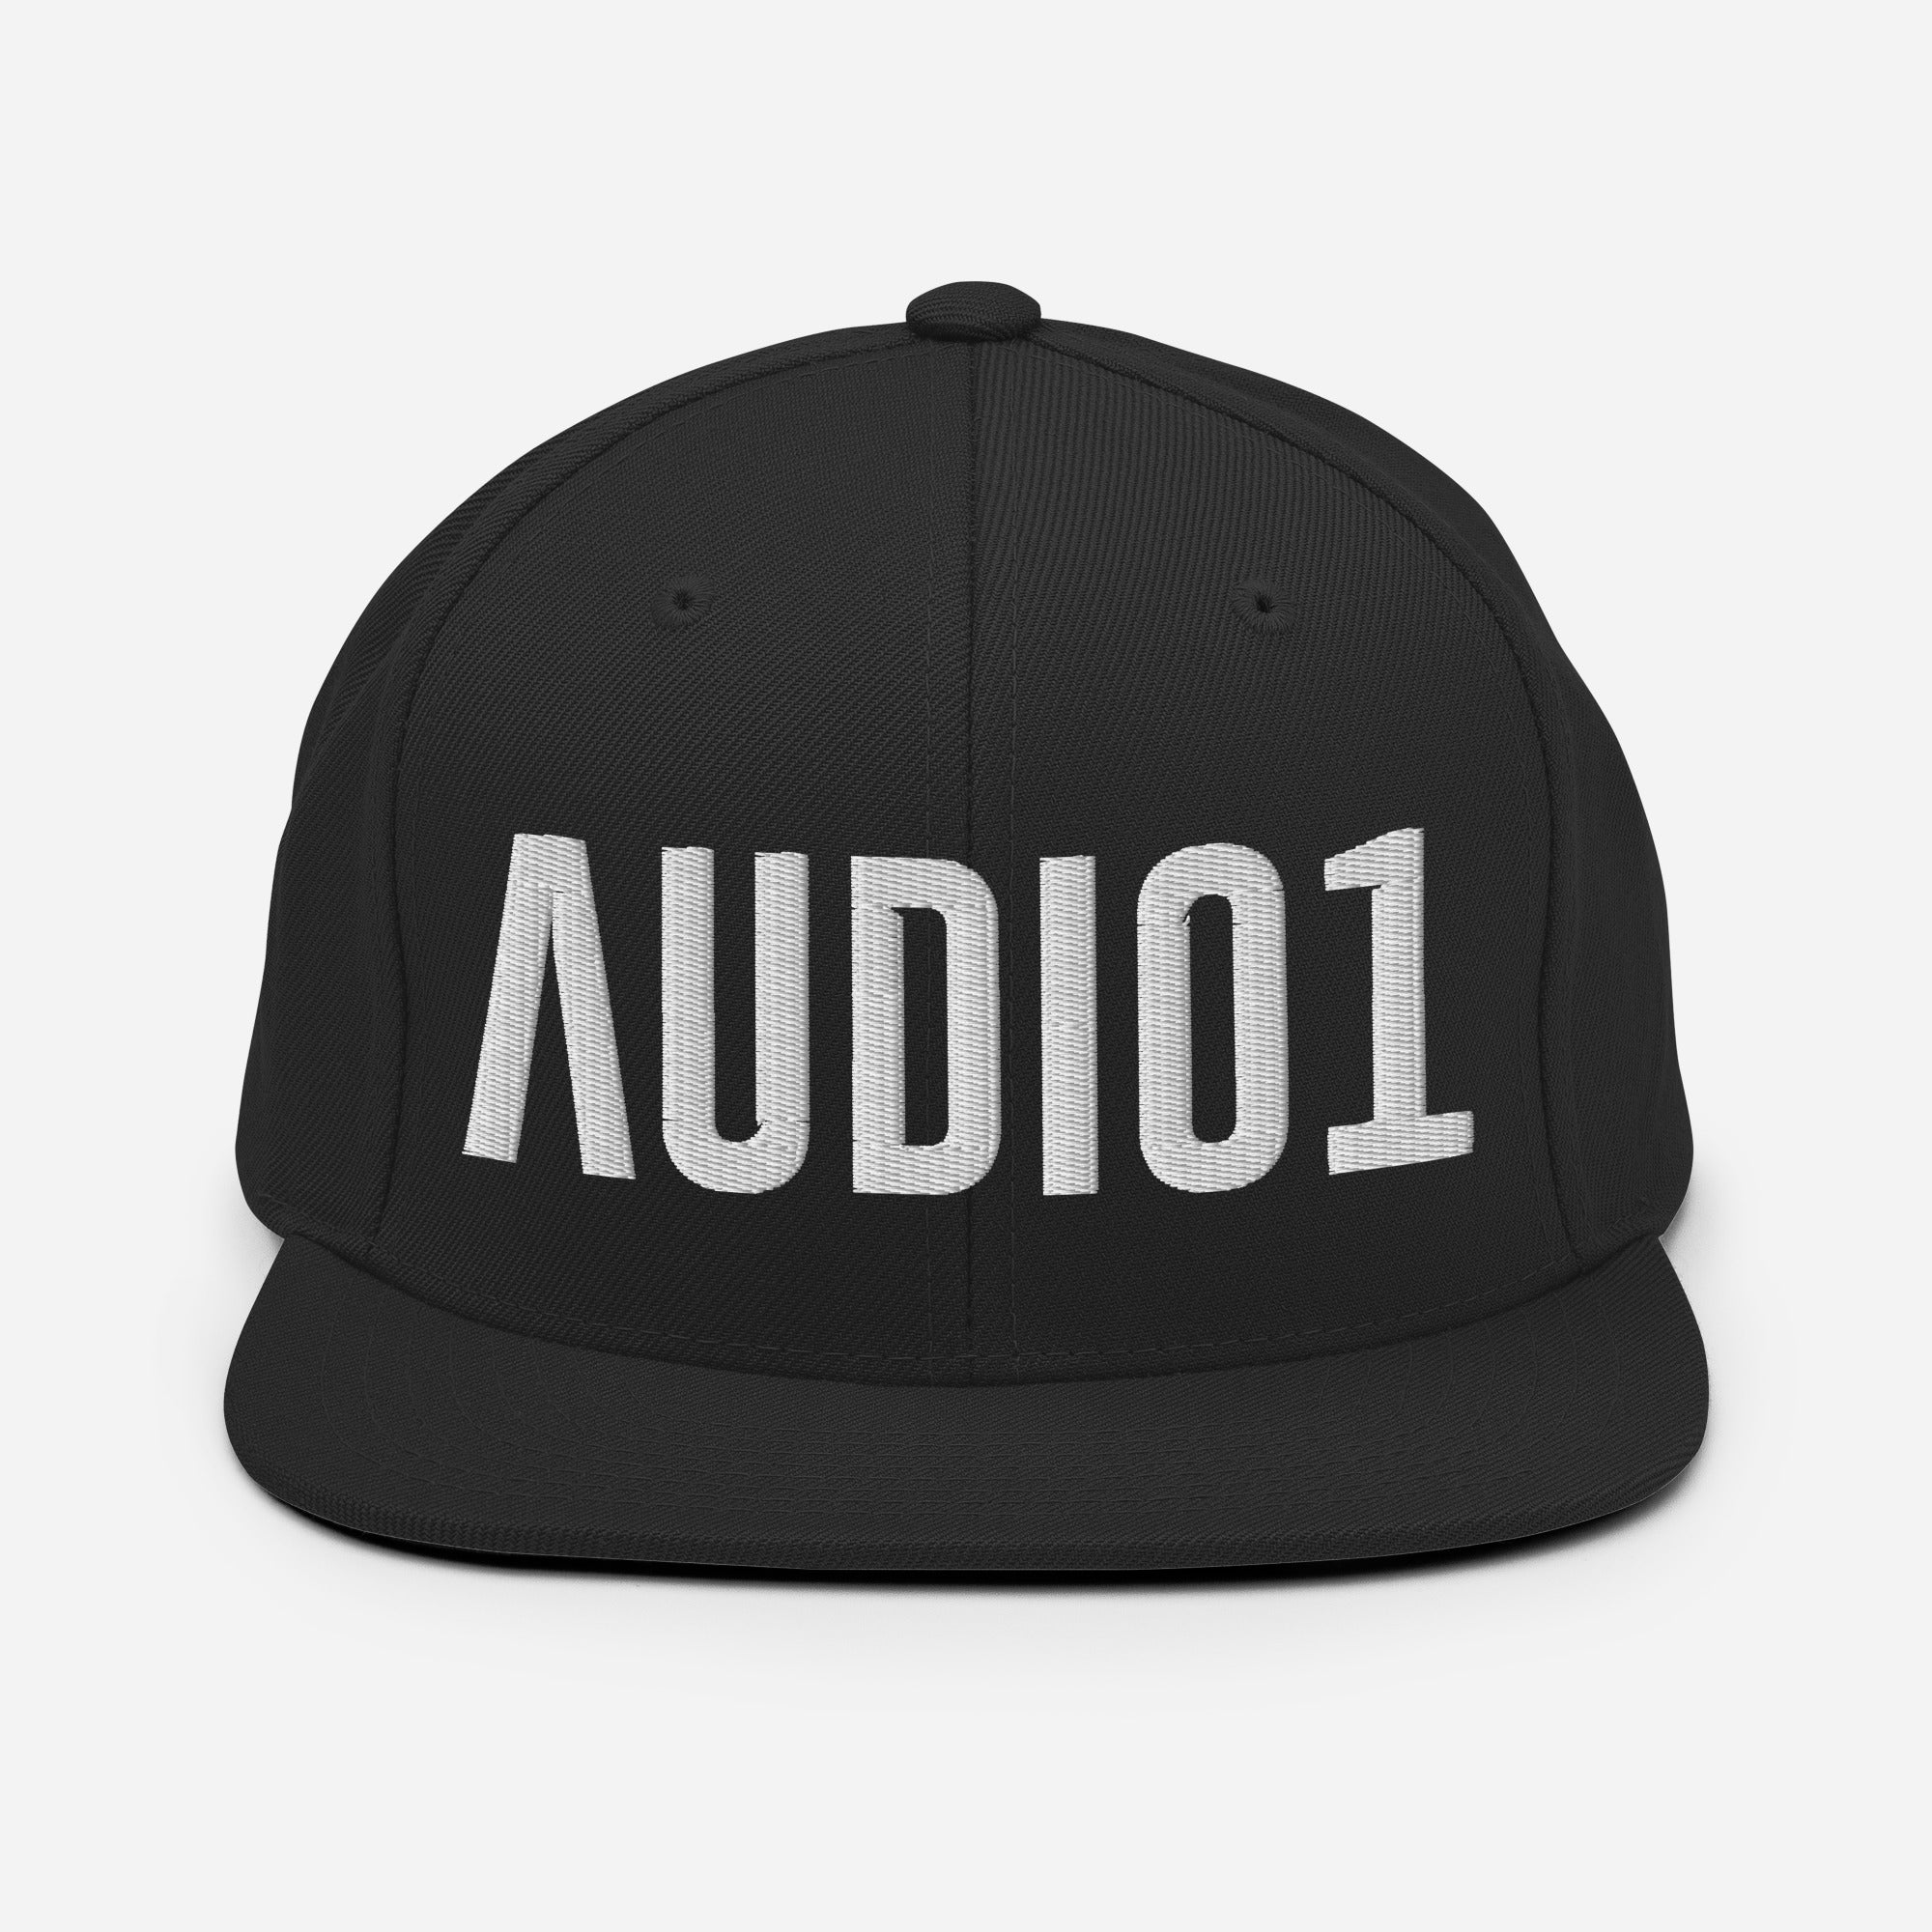 AUDIO 1 EMBROIDERY Snapback Hat